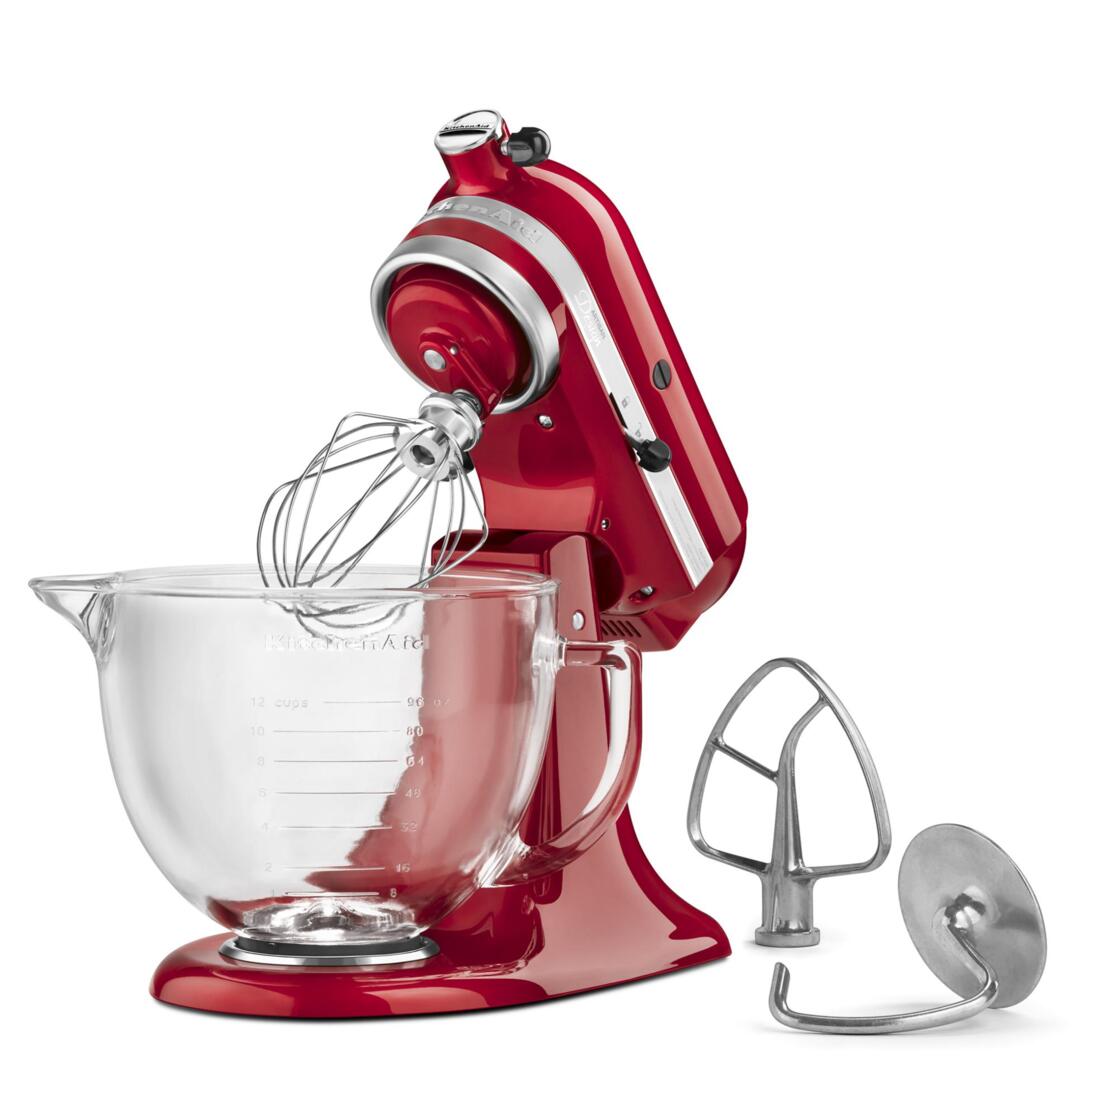 KitchenAid Artisan Design Series 5 Quart Tilt-Head Stand Mixer with Glass Bowl, Candy Apple Red, KSM155GB - image 4 of 7